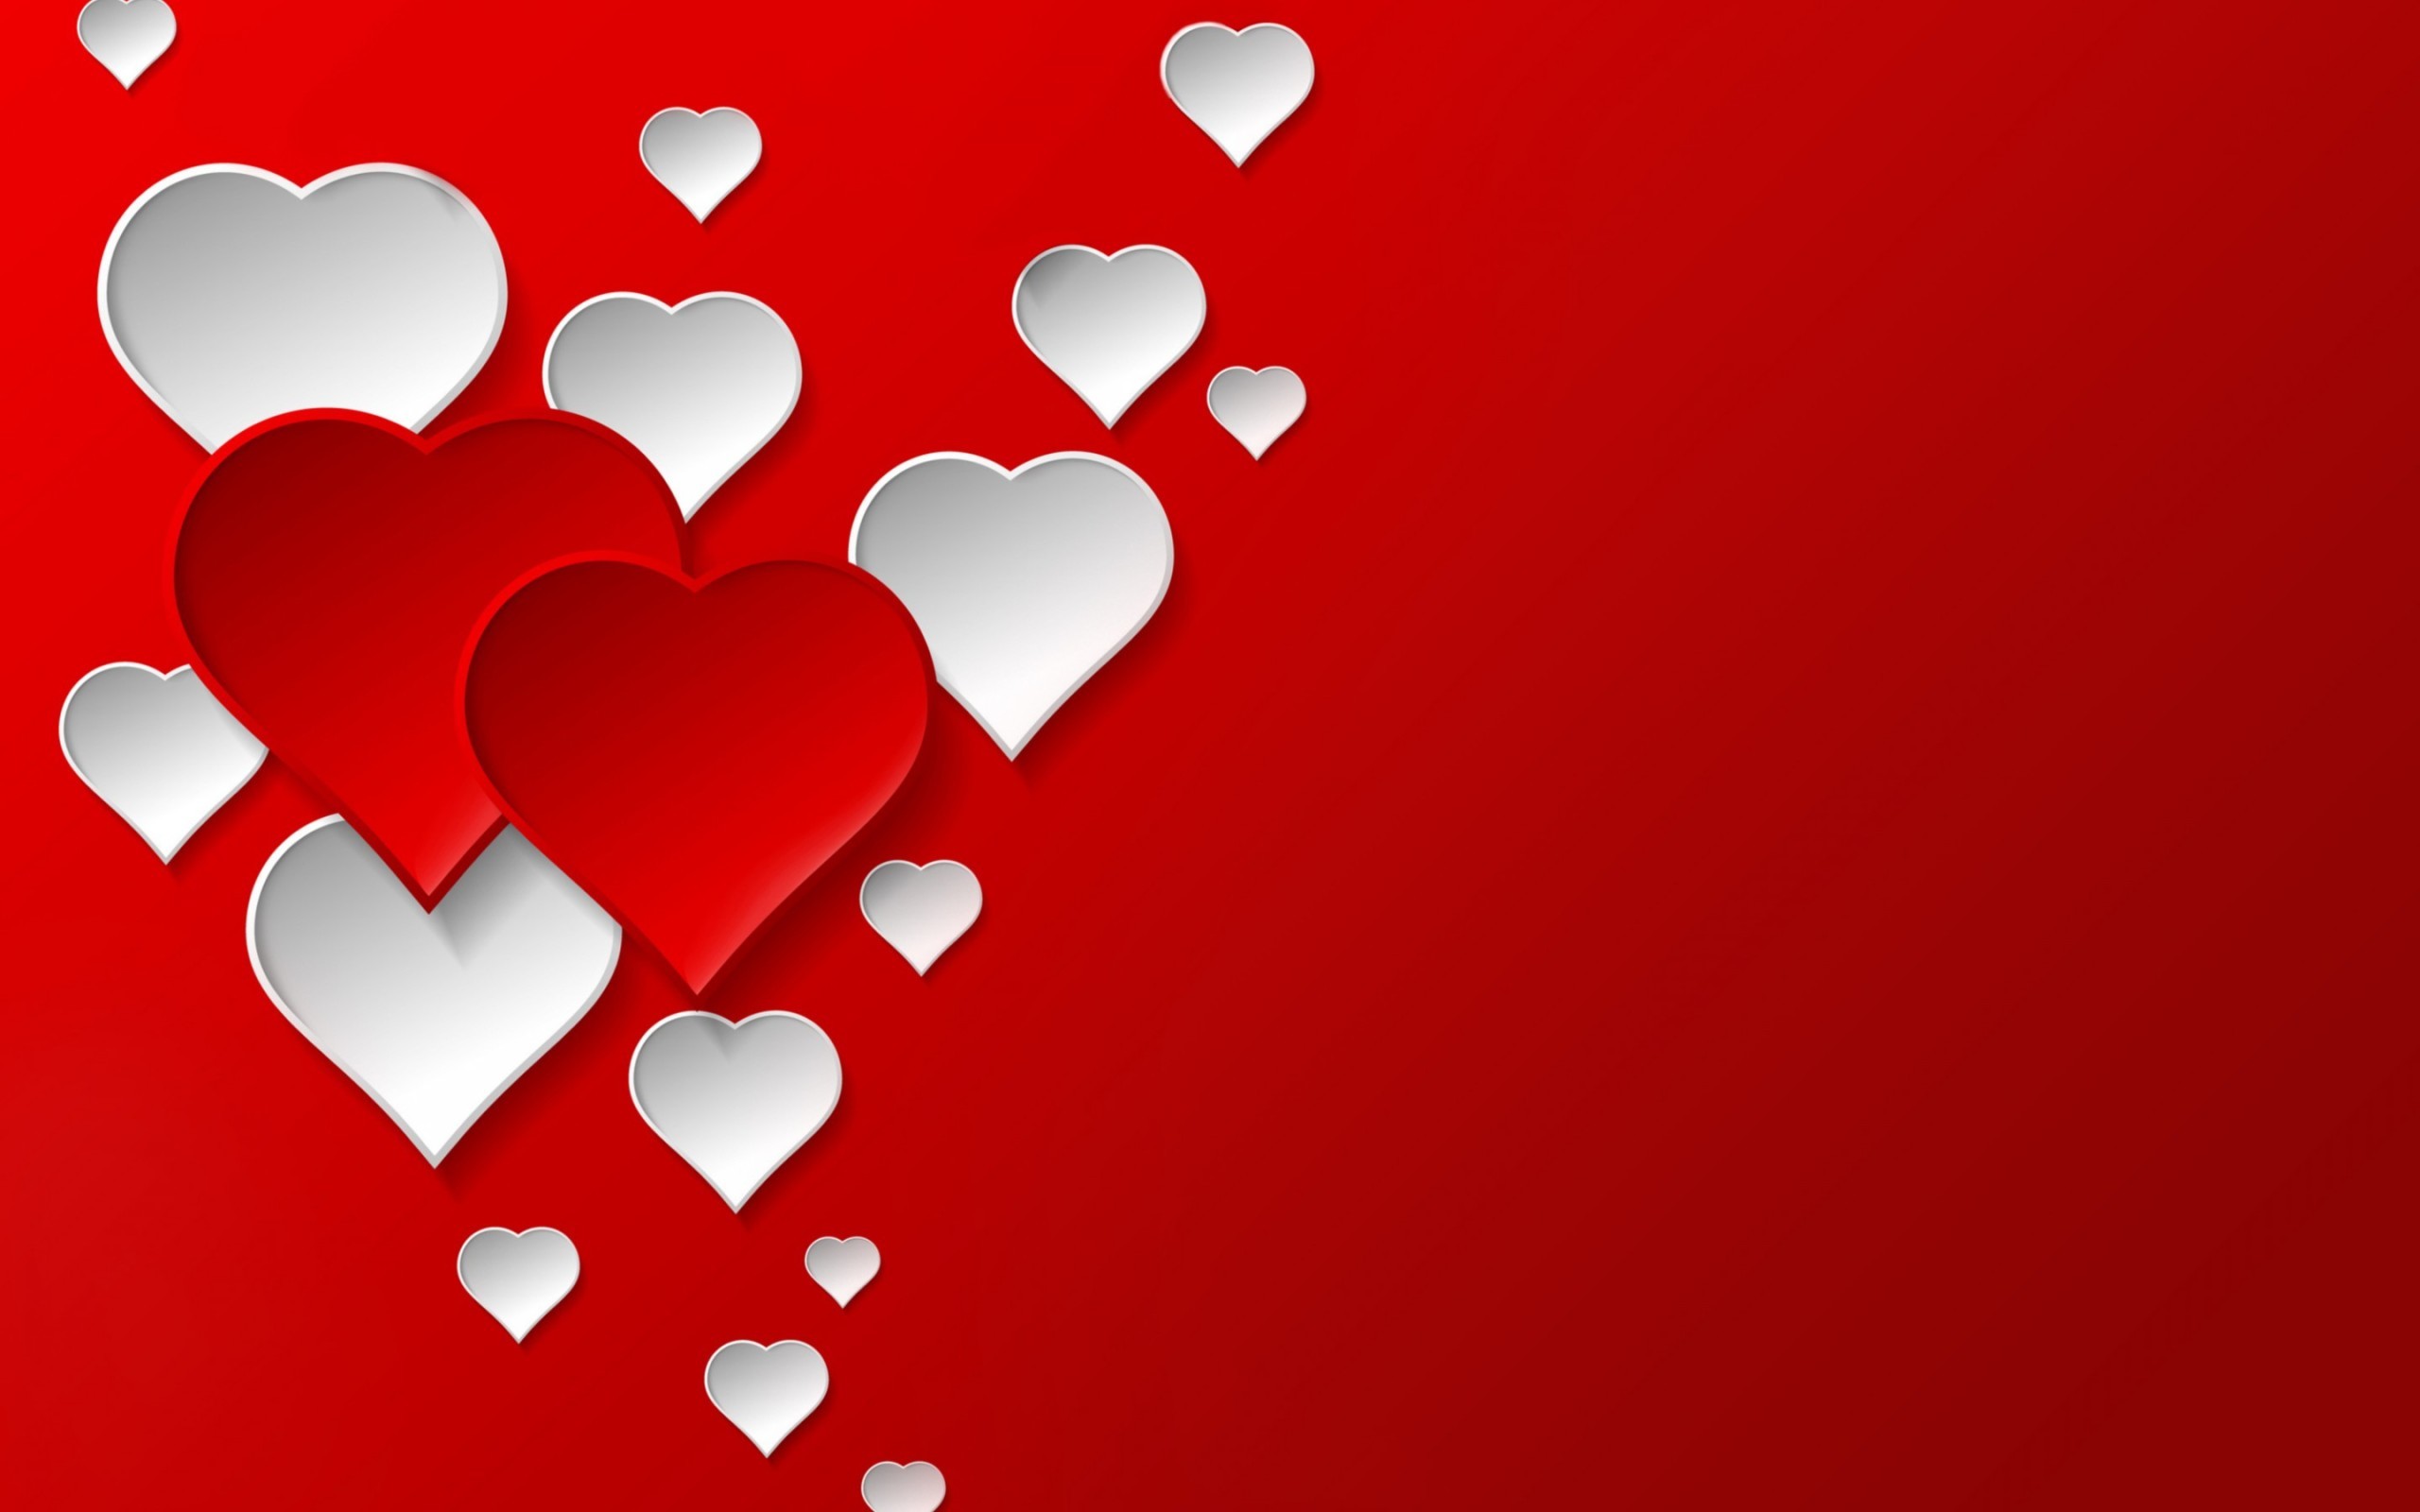 Valentine's Day – Red and White Hearts wallpaper